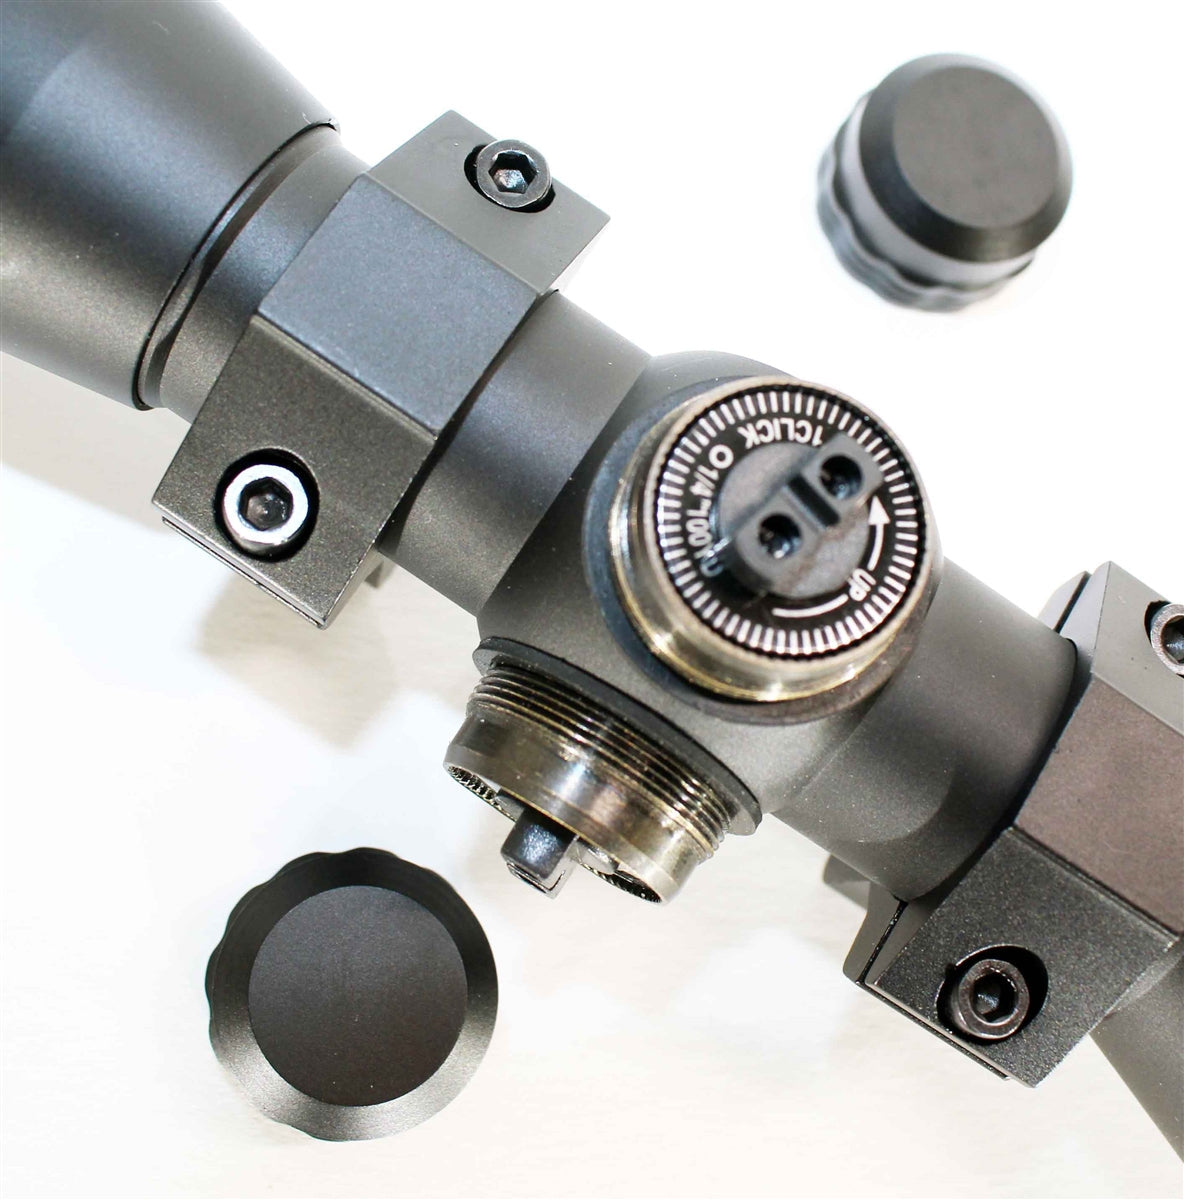 Tactical 4x32 Mil-Dot Reticle Scope Picatinny Rail System Style Compatible With Kel-Tec KSG Pump.